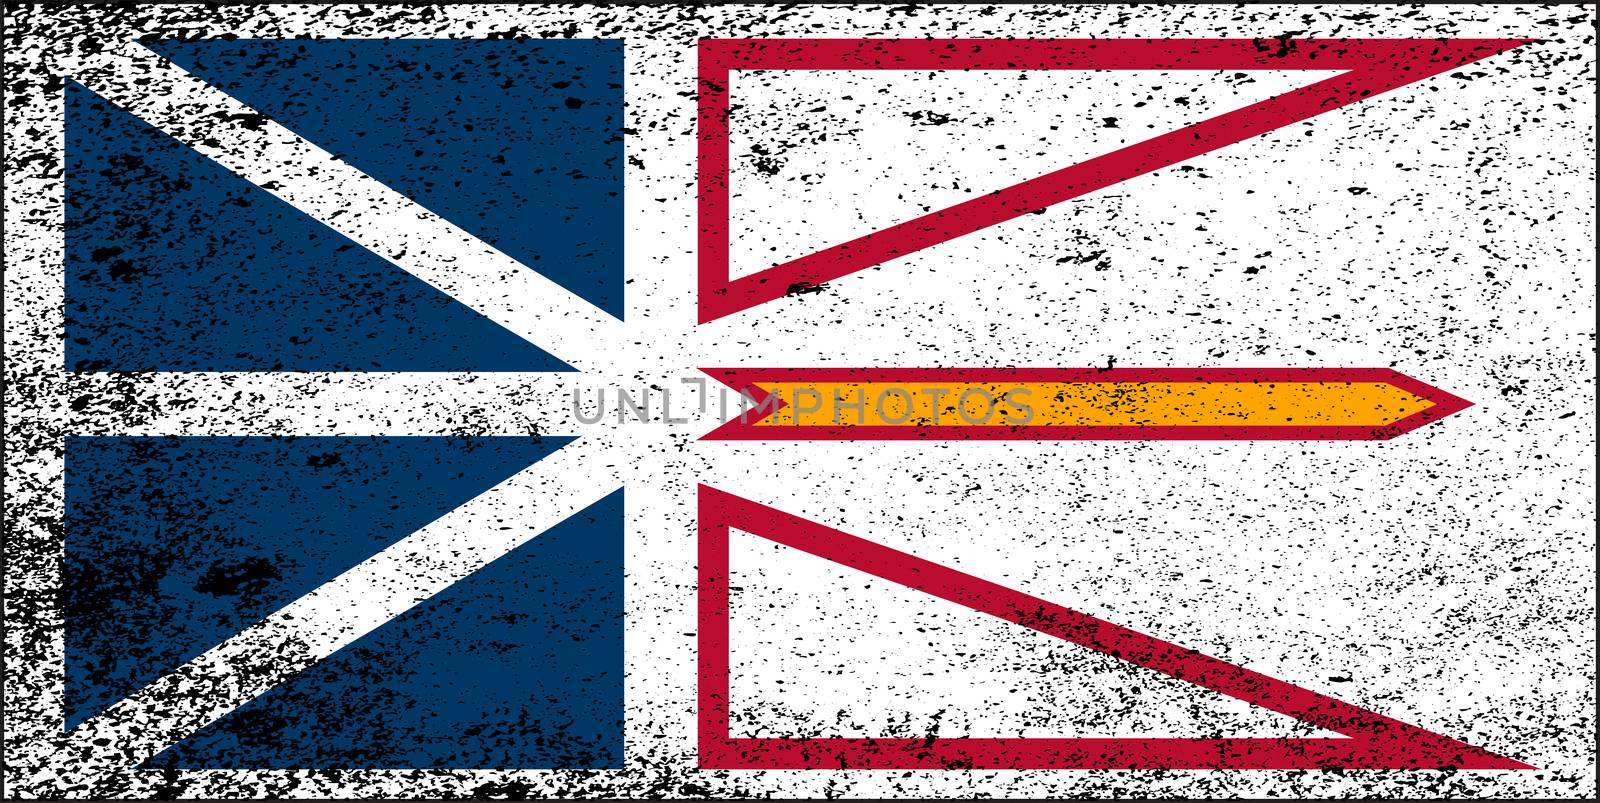 The provincial Flag Of Quebec Canada with motif and Union Flag with dirty grunge FX